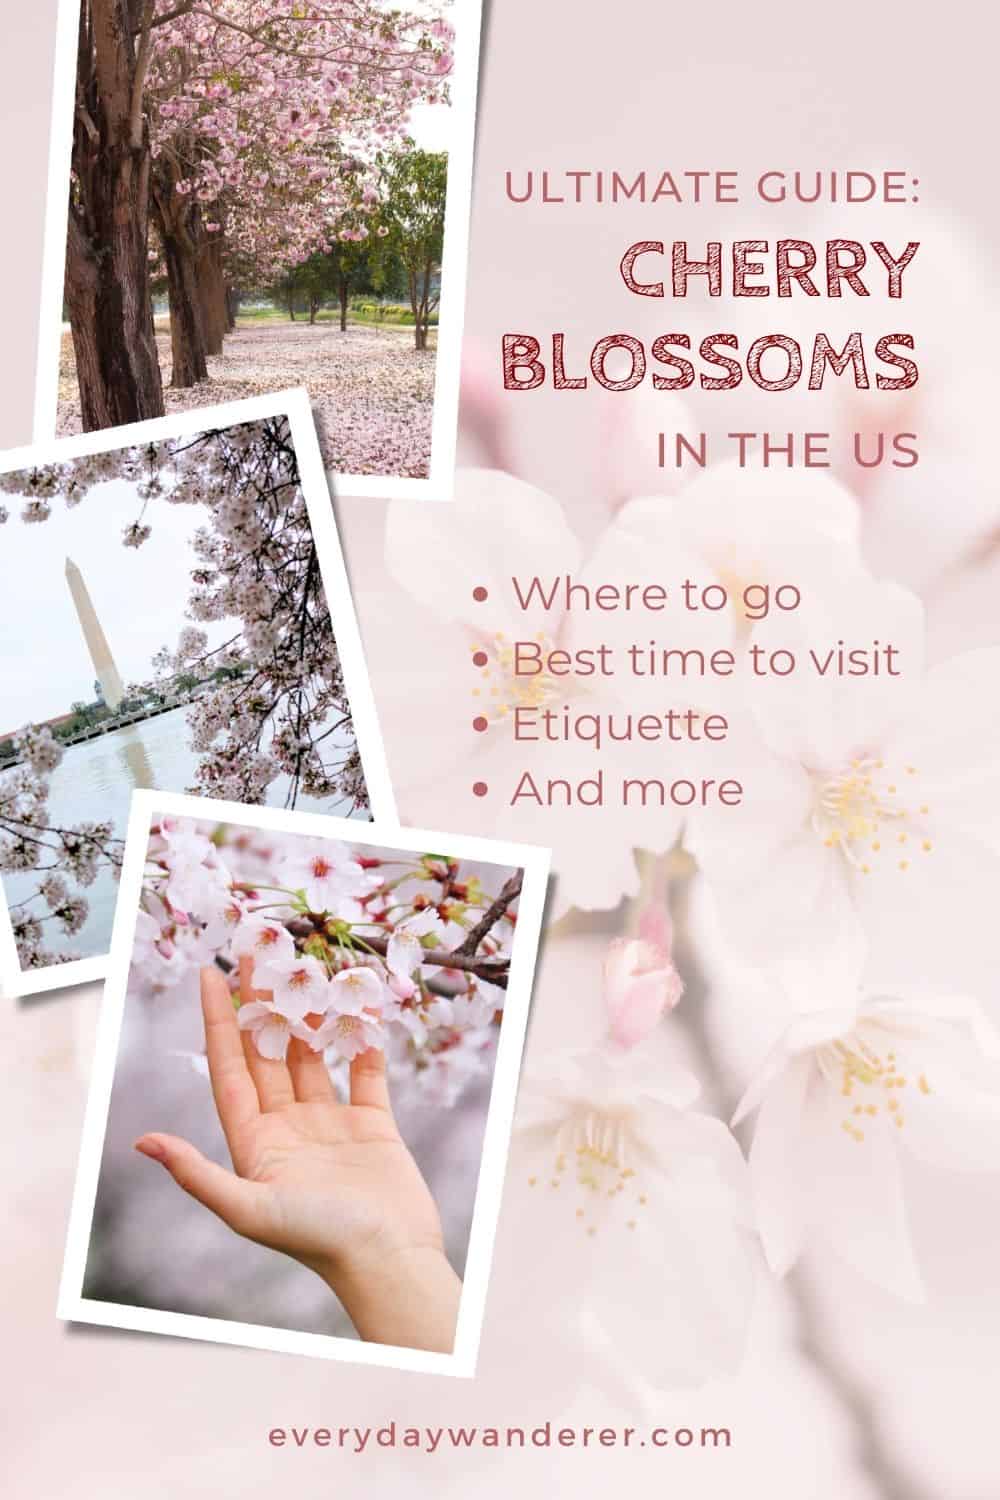 8 Of The Best Places To See Cherry Blossoms In Canada If You Can't